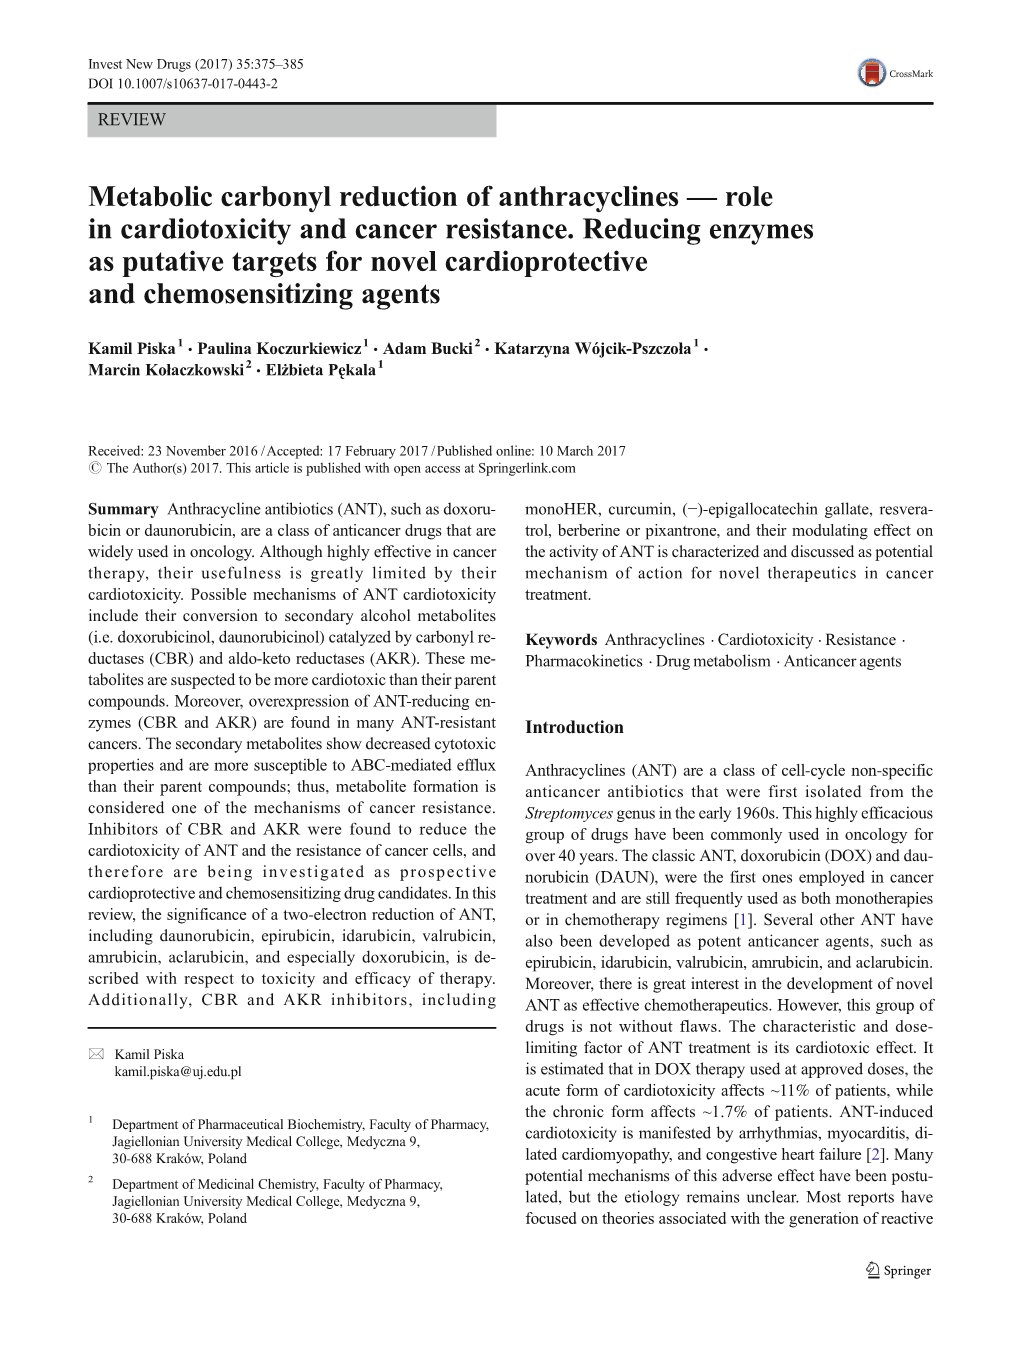 Metabolic Carbonyl Reduction of Anthracyclines — Role in Cardiotoxicity and Cancer Resistance. Reducing Enzymes As Putative Ta